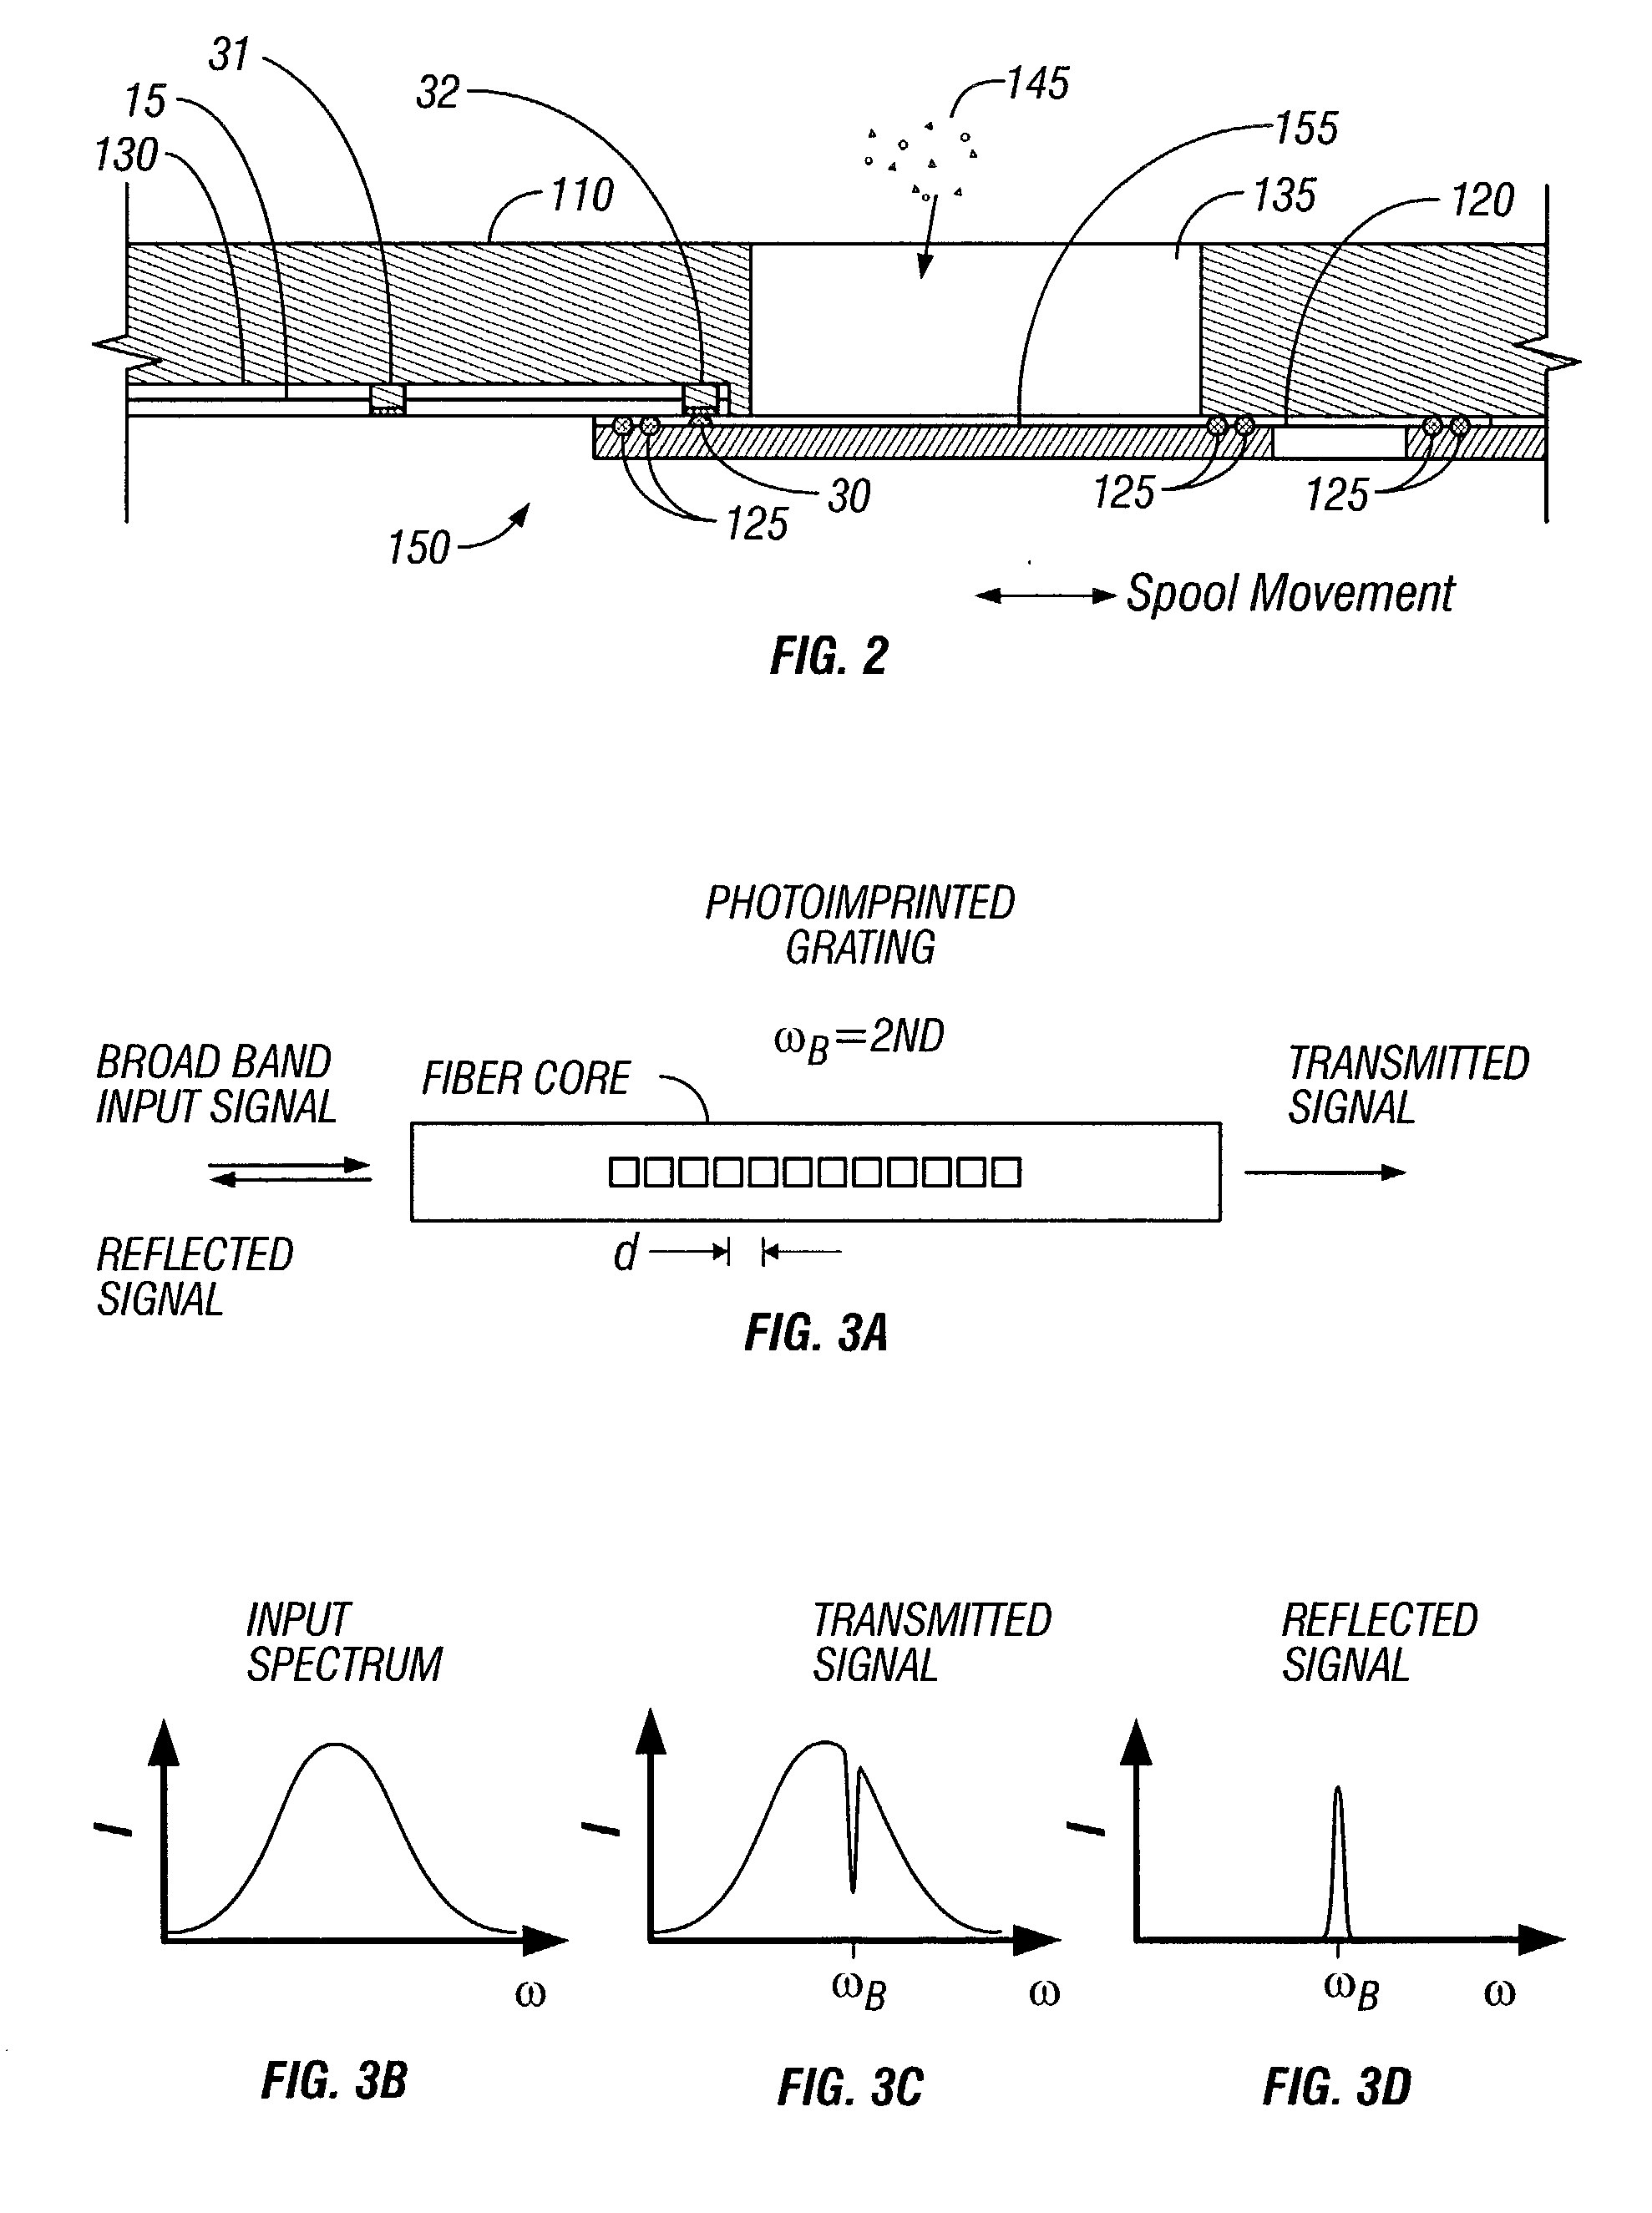 Optical position sensing for well control tools